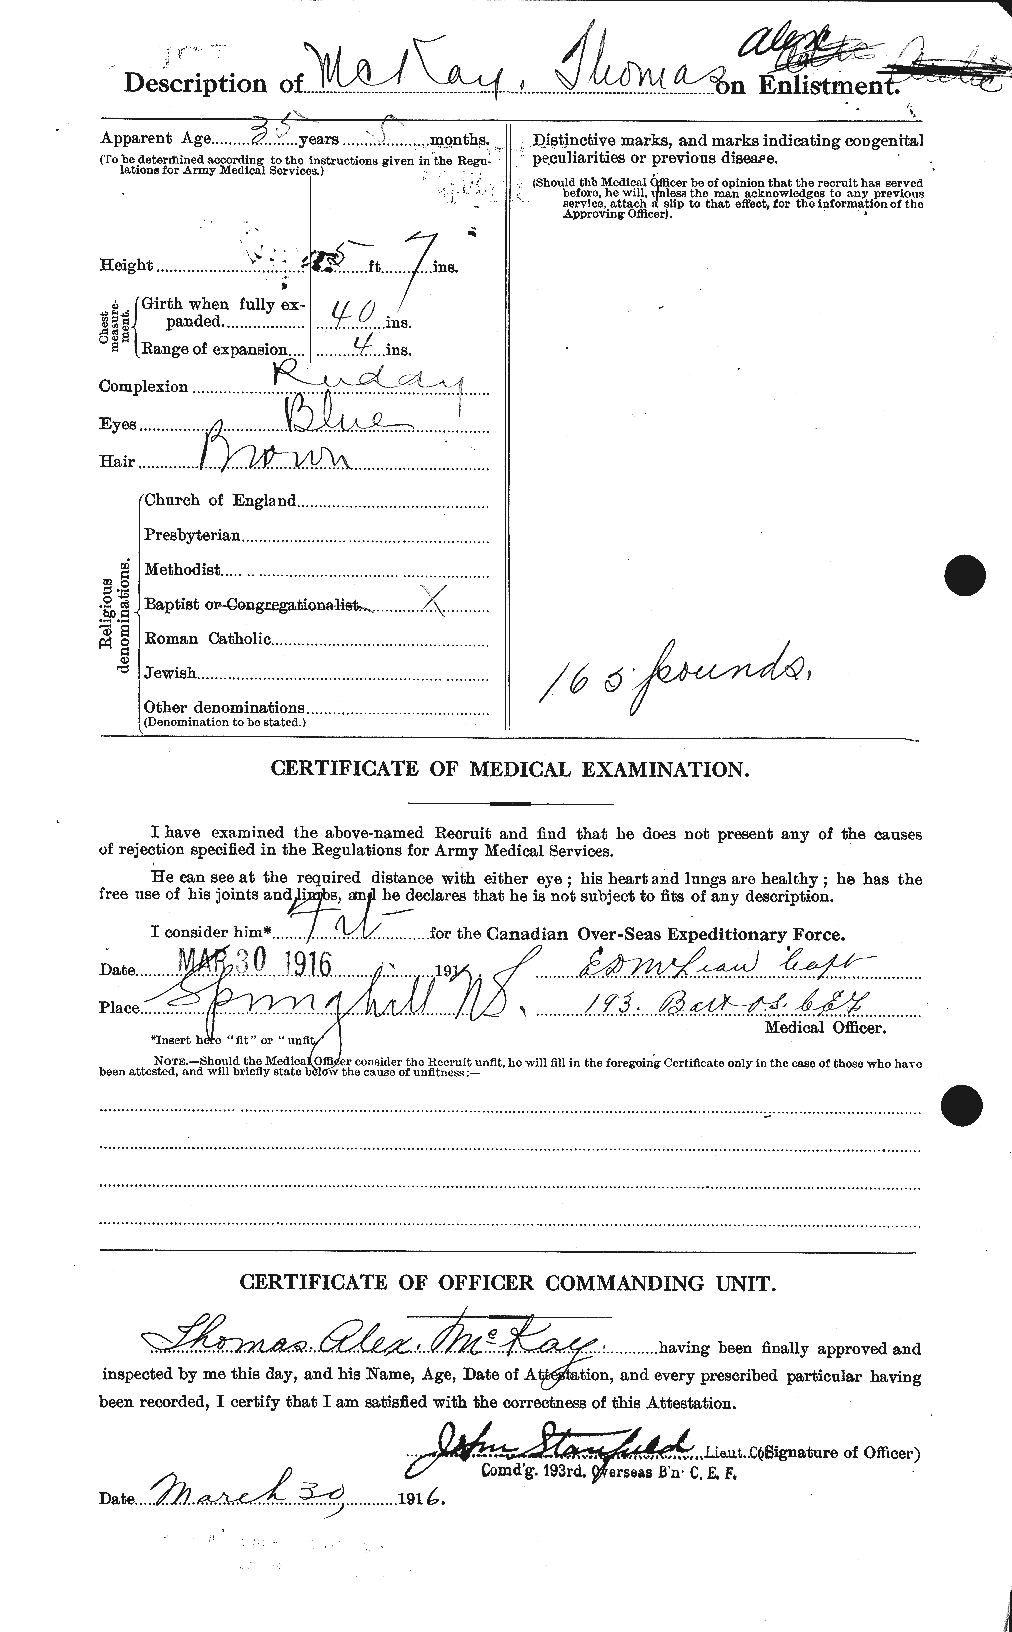 Personnel Records of the First World War - CEF 530169b